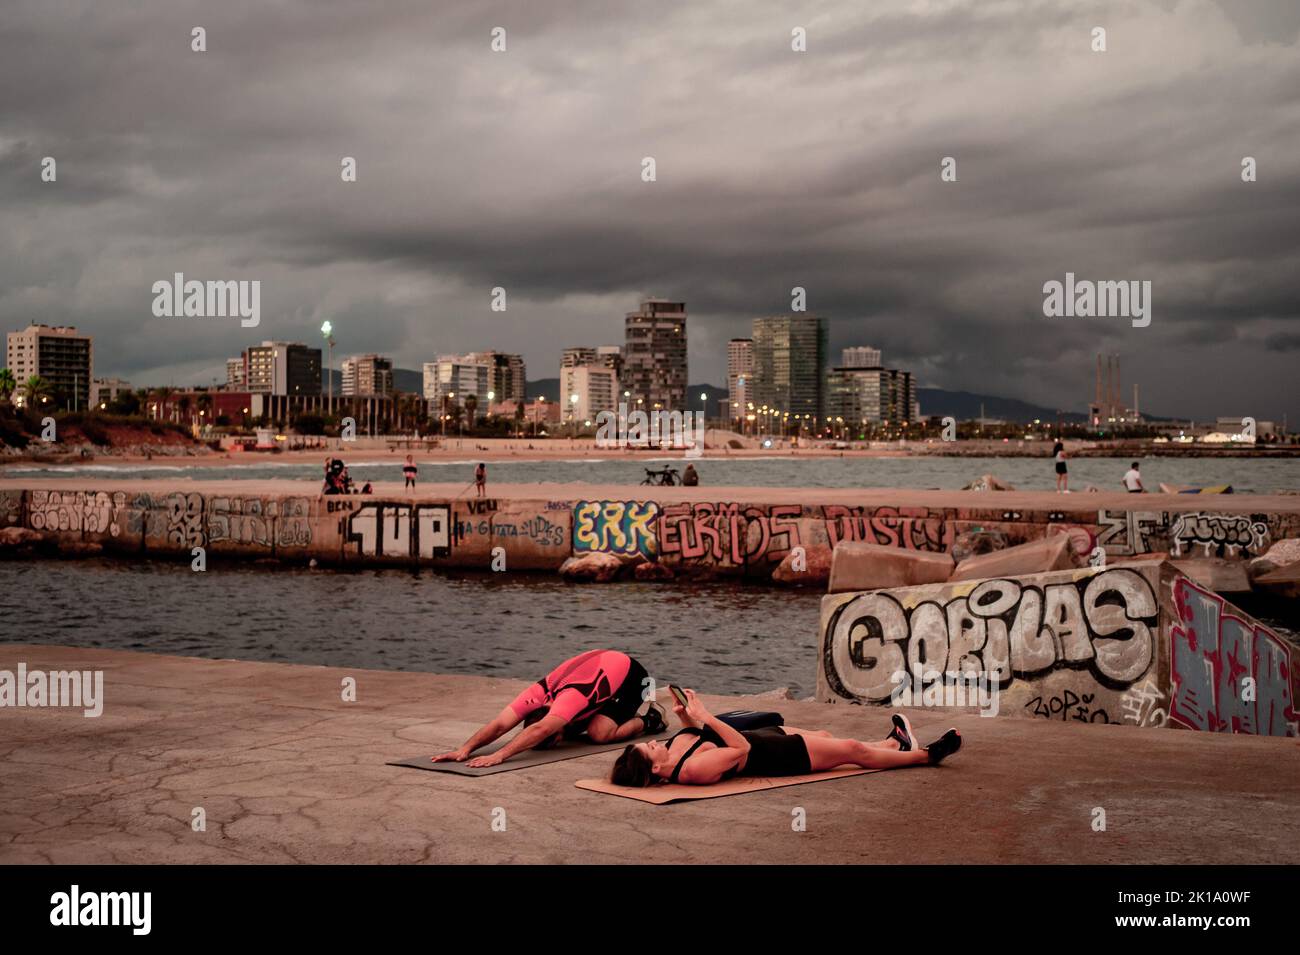 September 16, 2022, Barcelona, Spain: People exercise on a breakwater as stormy clouds roll across the sky in Barcelona, Spain. Credit: Jordi Boixareu/Alamy Live News Stock Photo